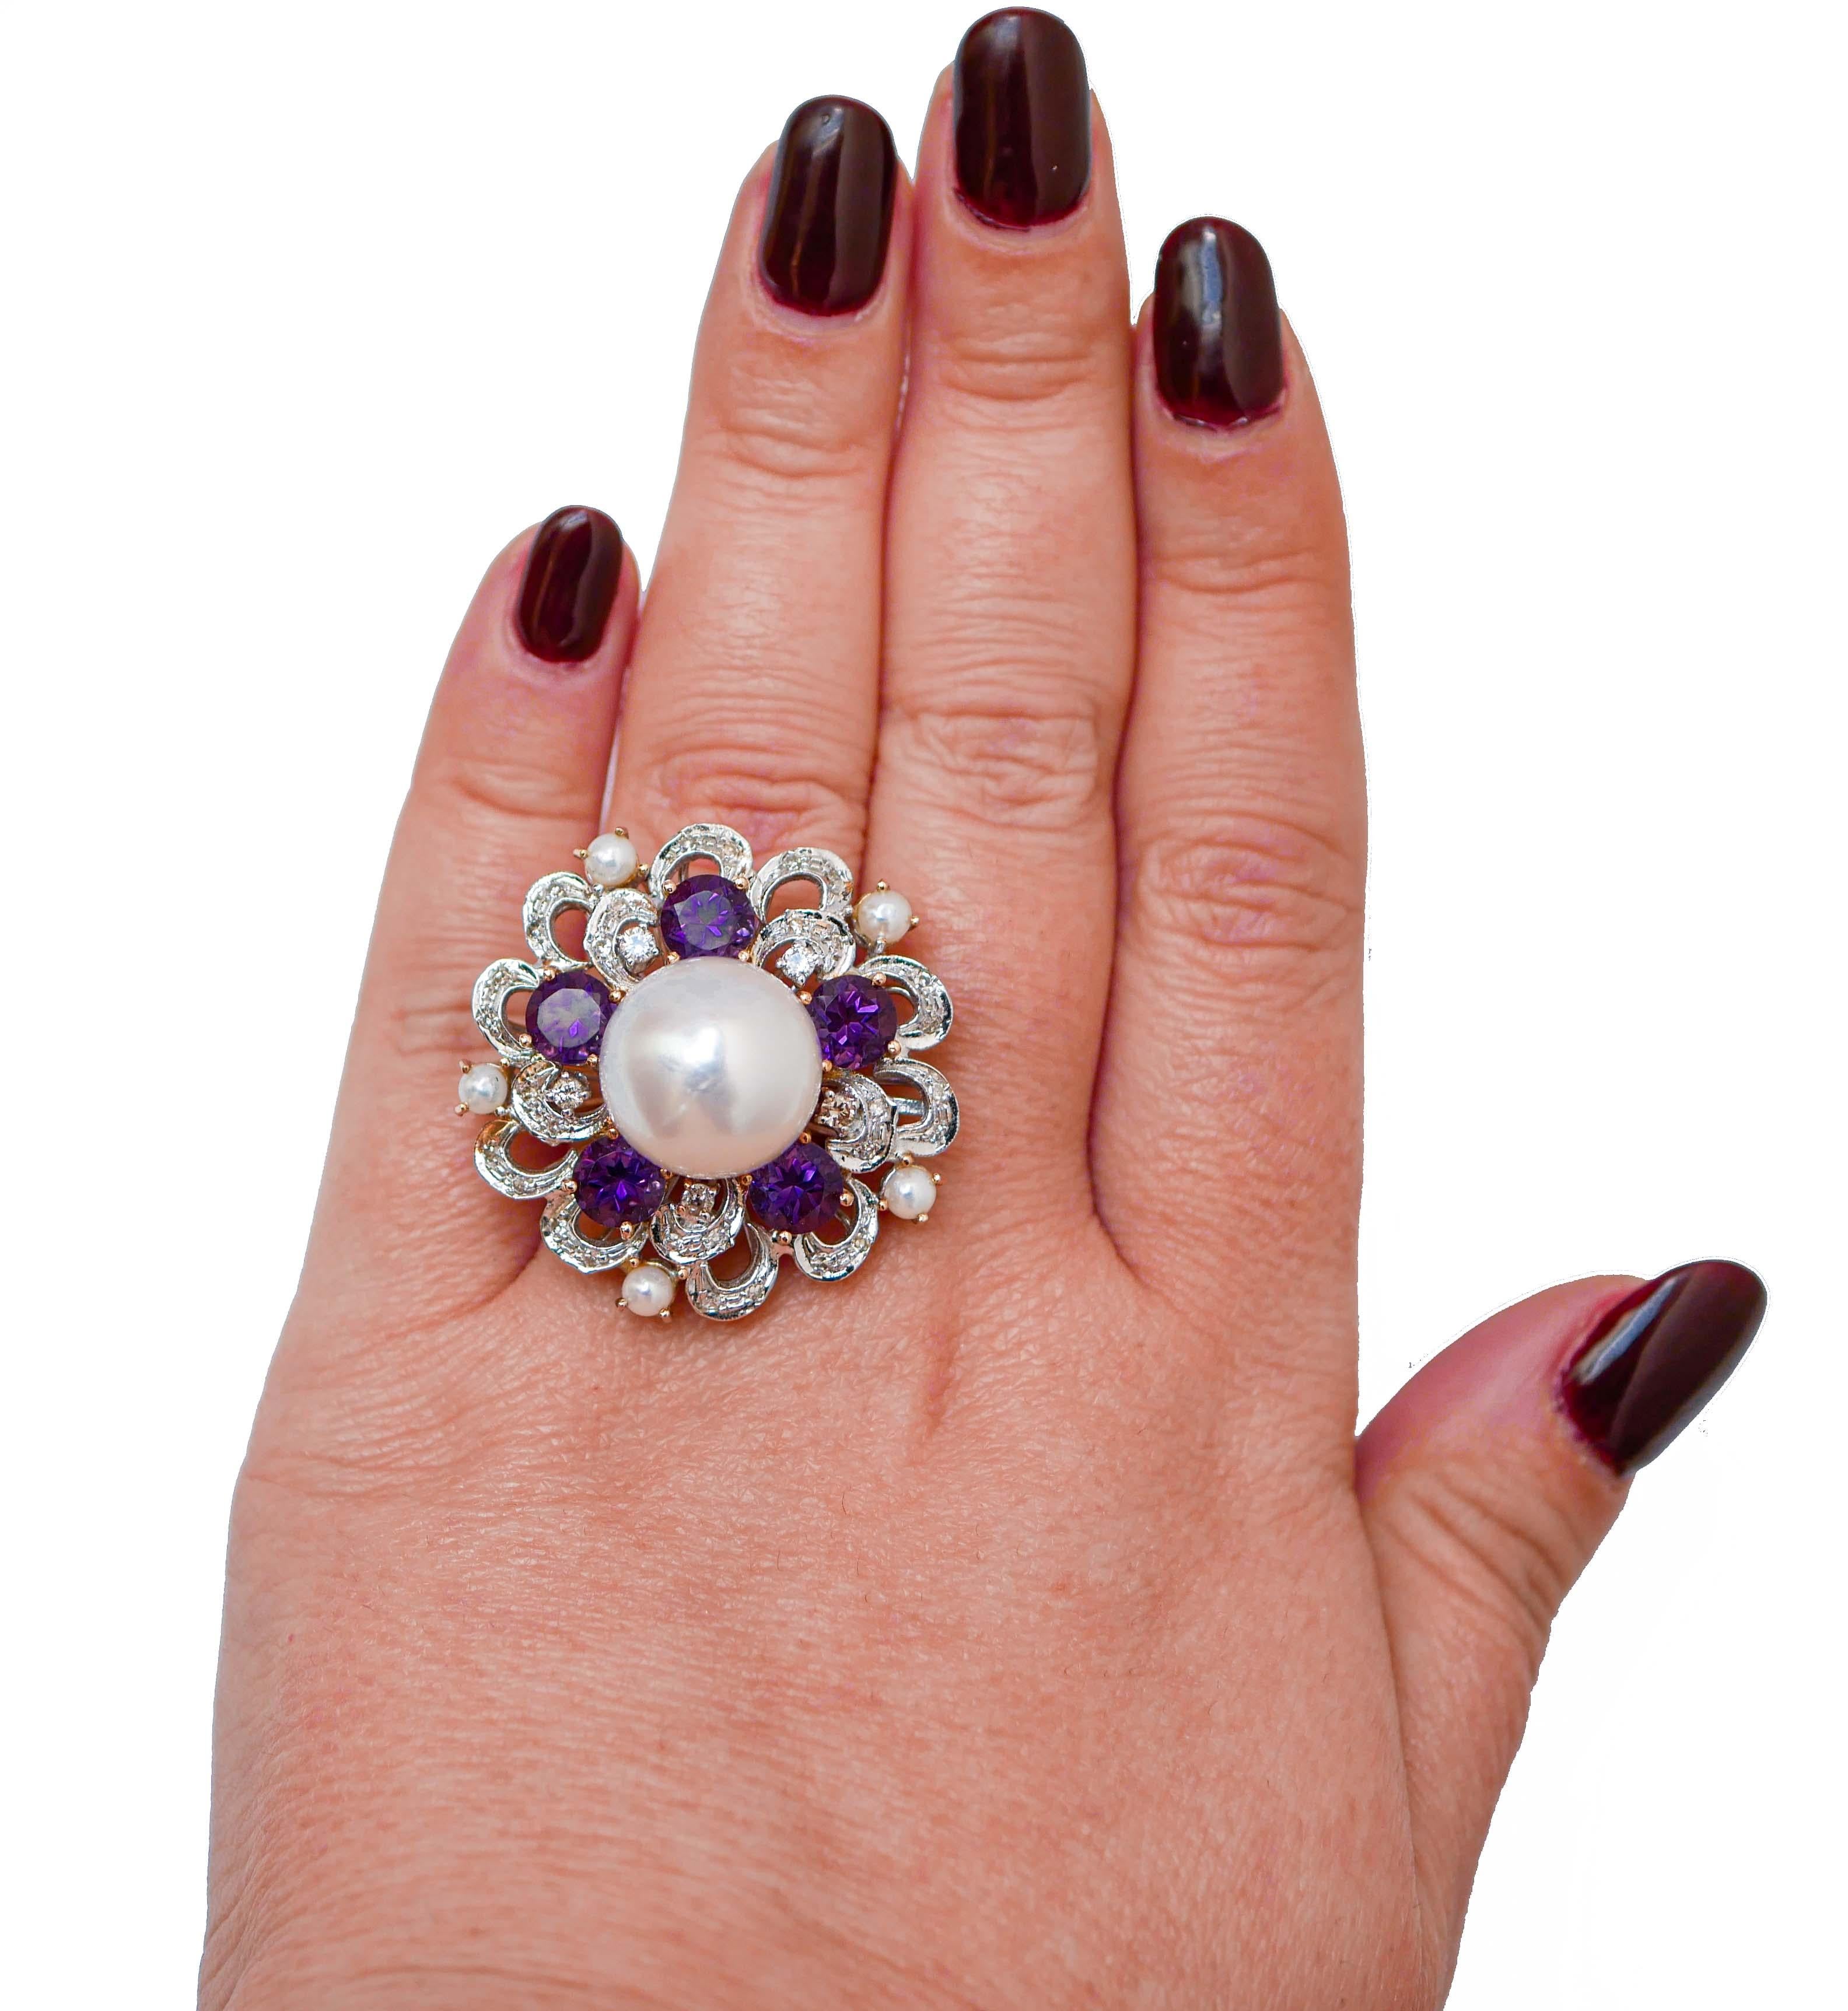 Mixed Cut South-Sea Pearl, Diamonds, Amethysts, Pearls, 14Kt Rose Gold and White Gold Ring For Sale